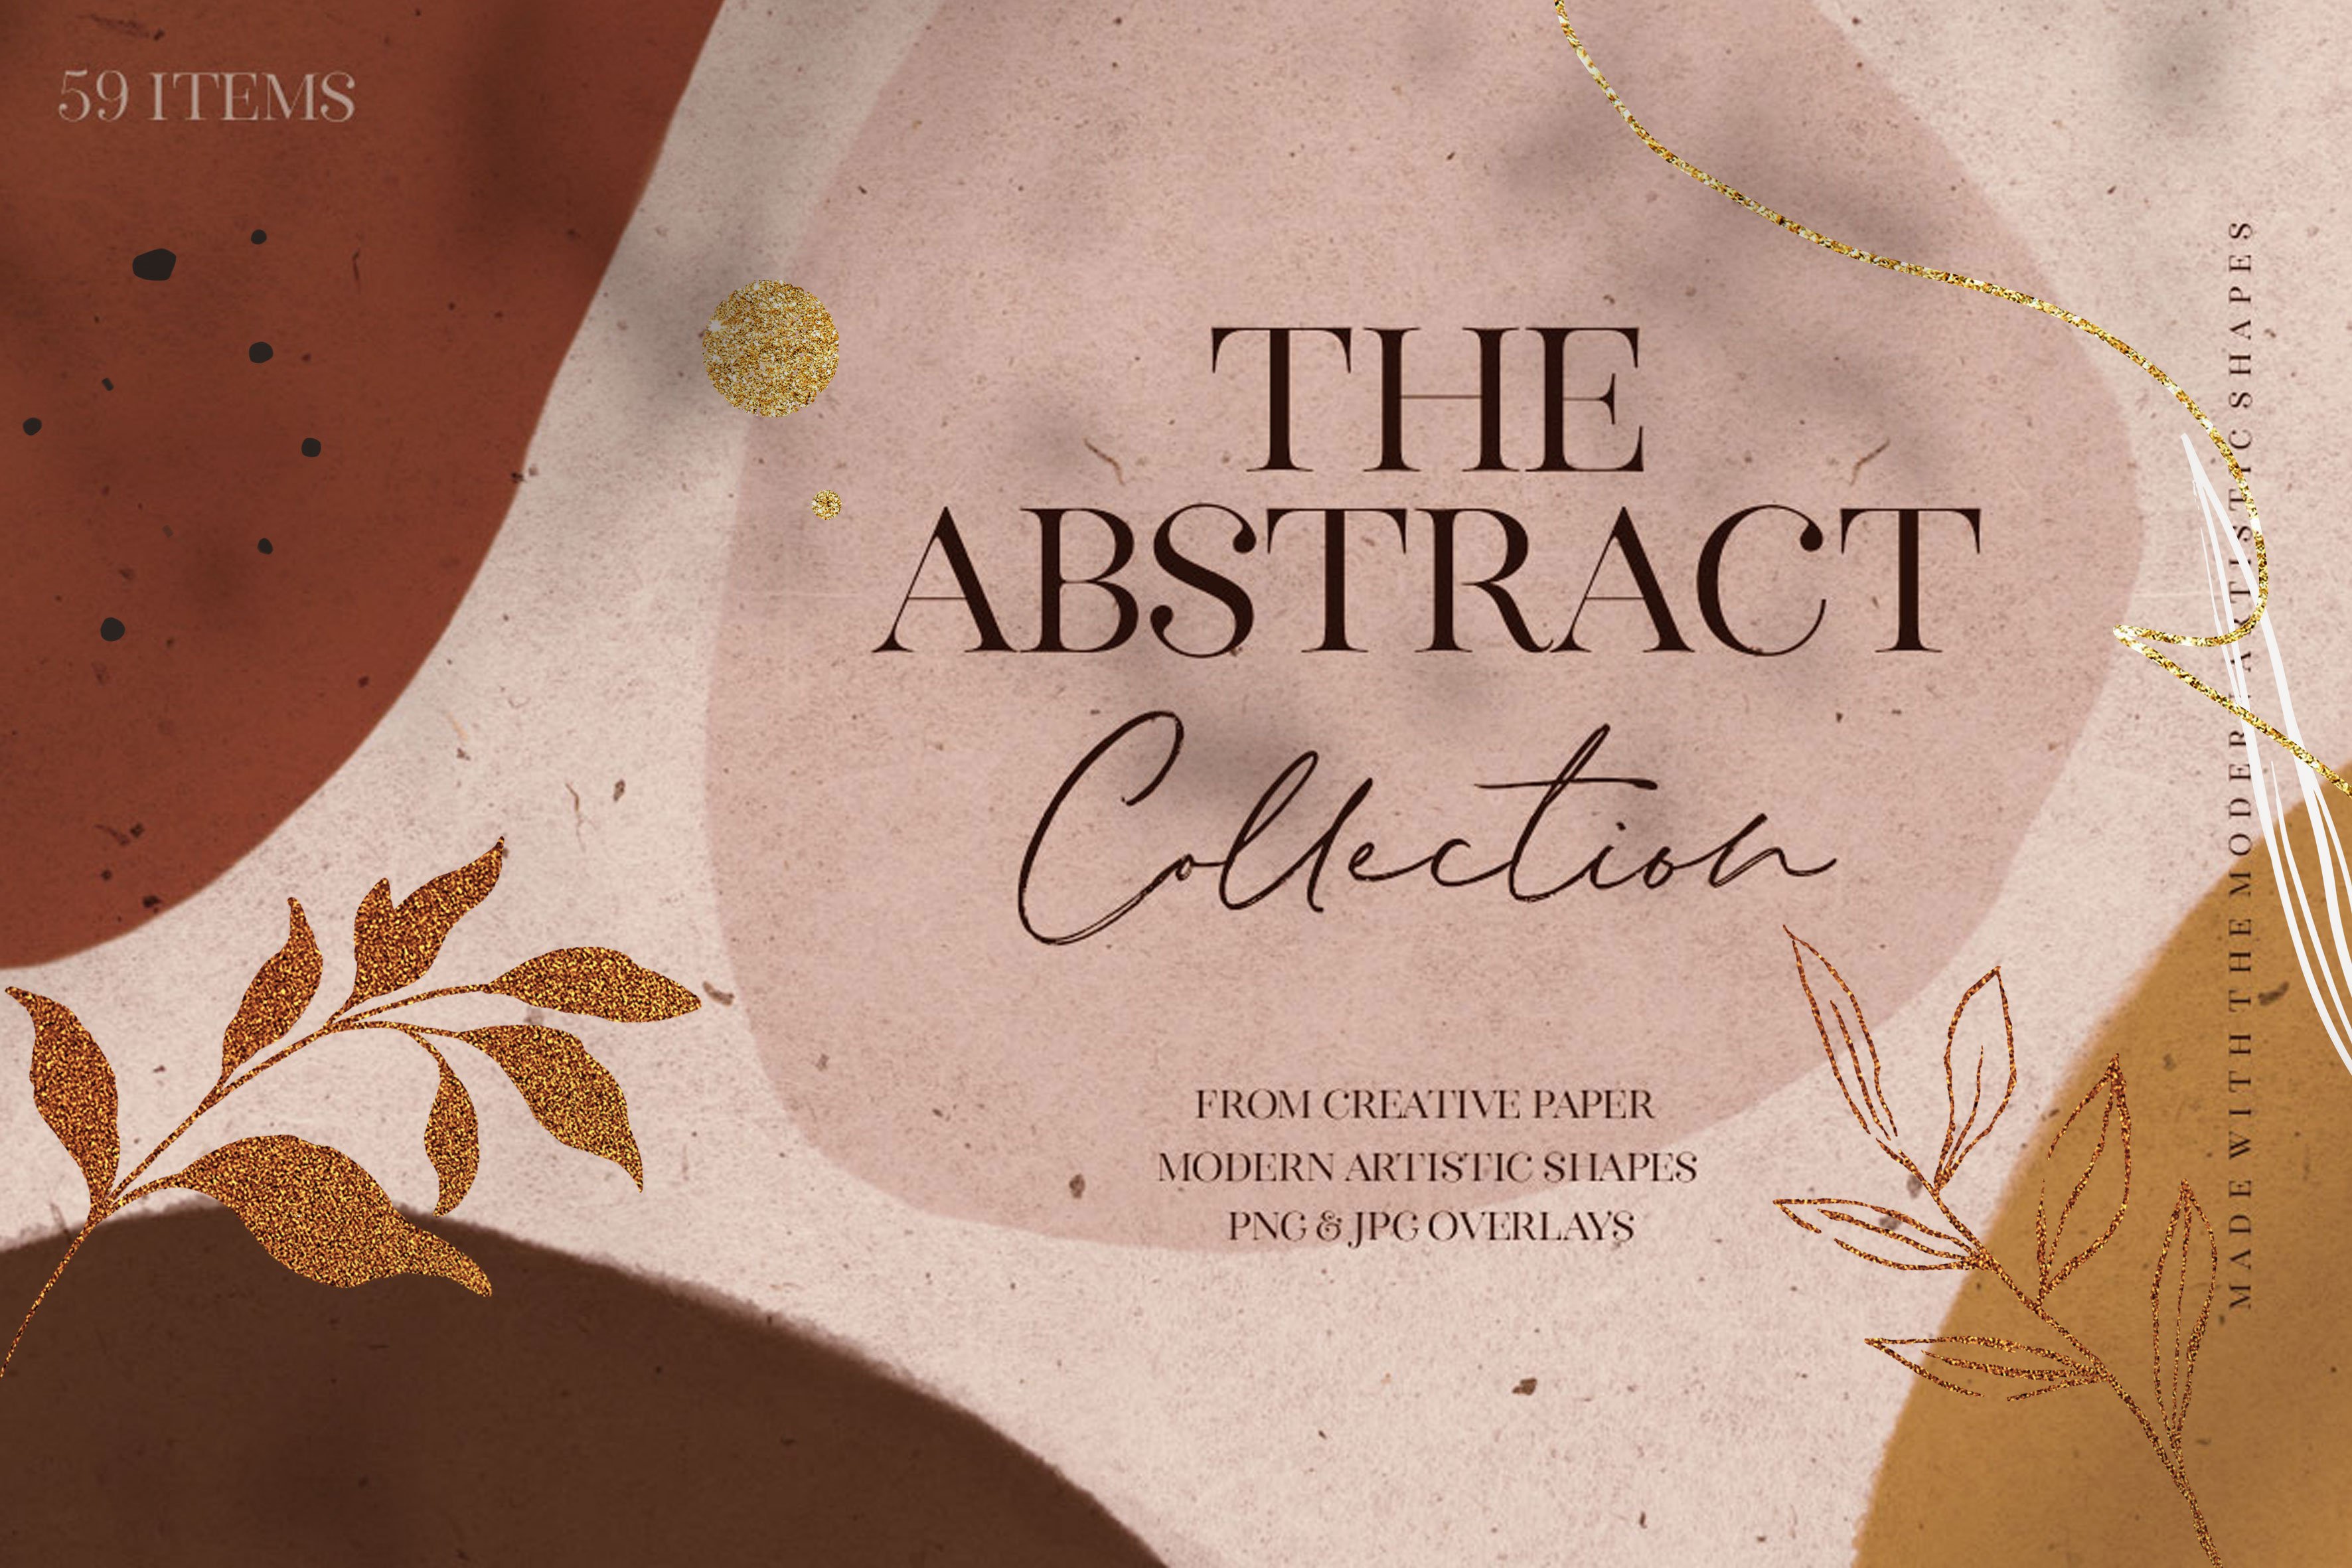 Abstract Shapes Collection Vol 2